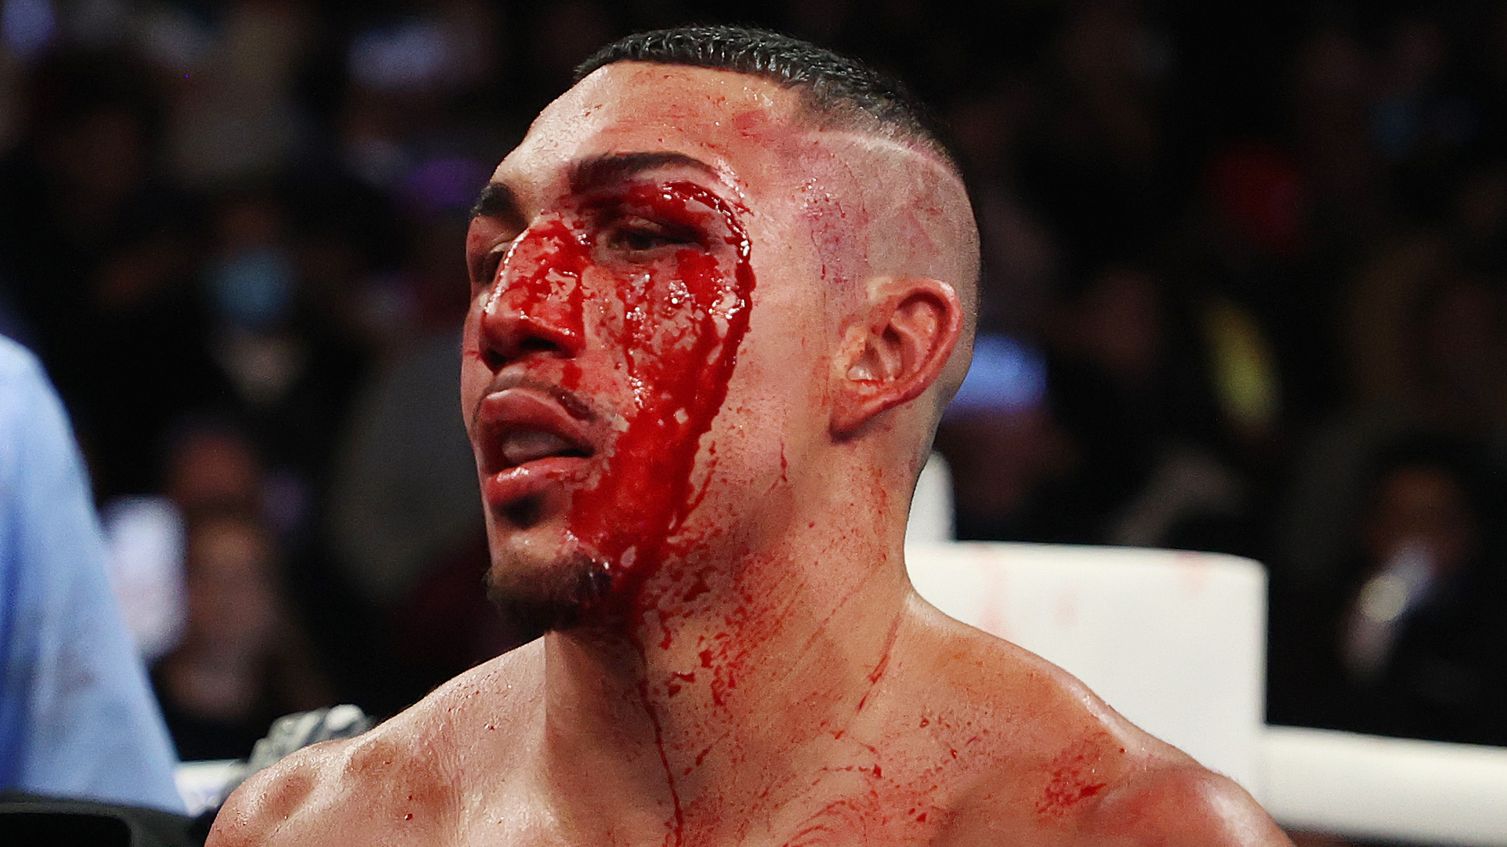 Teofimo Lopez stands bloodied after his bout against George Kambosos.